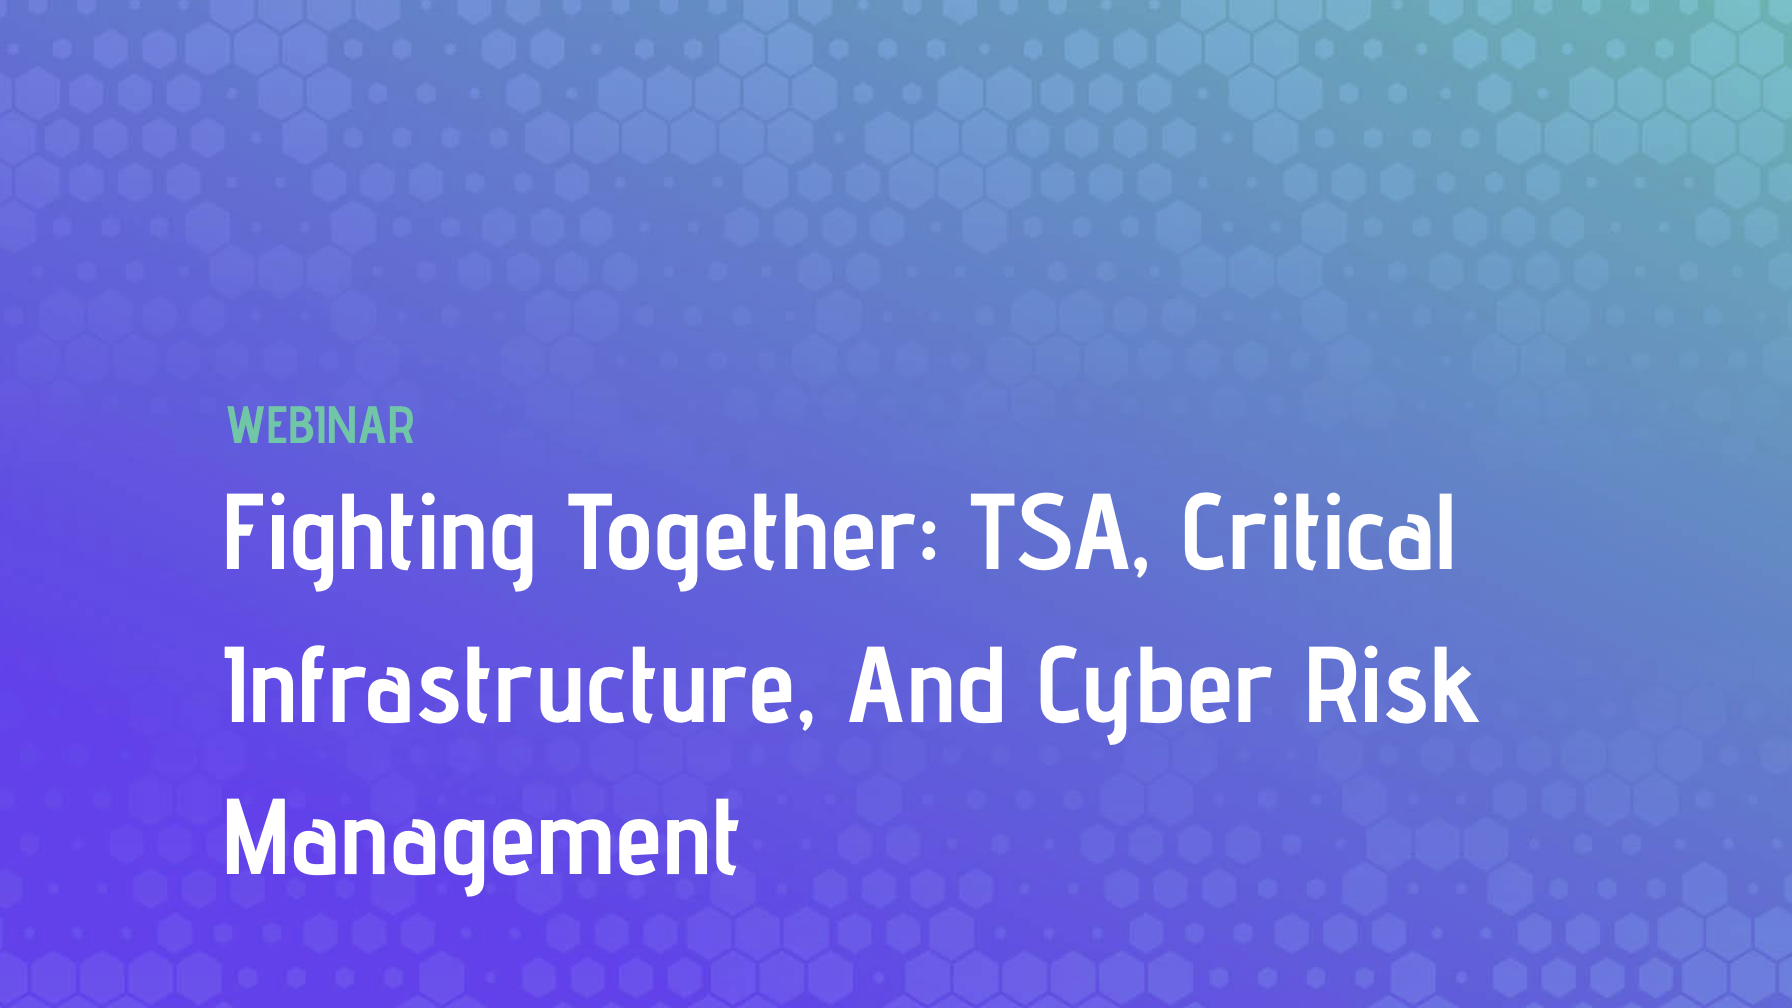 Fighting Together: TSA, Critical Infrastructure, And Cyber Risk Management